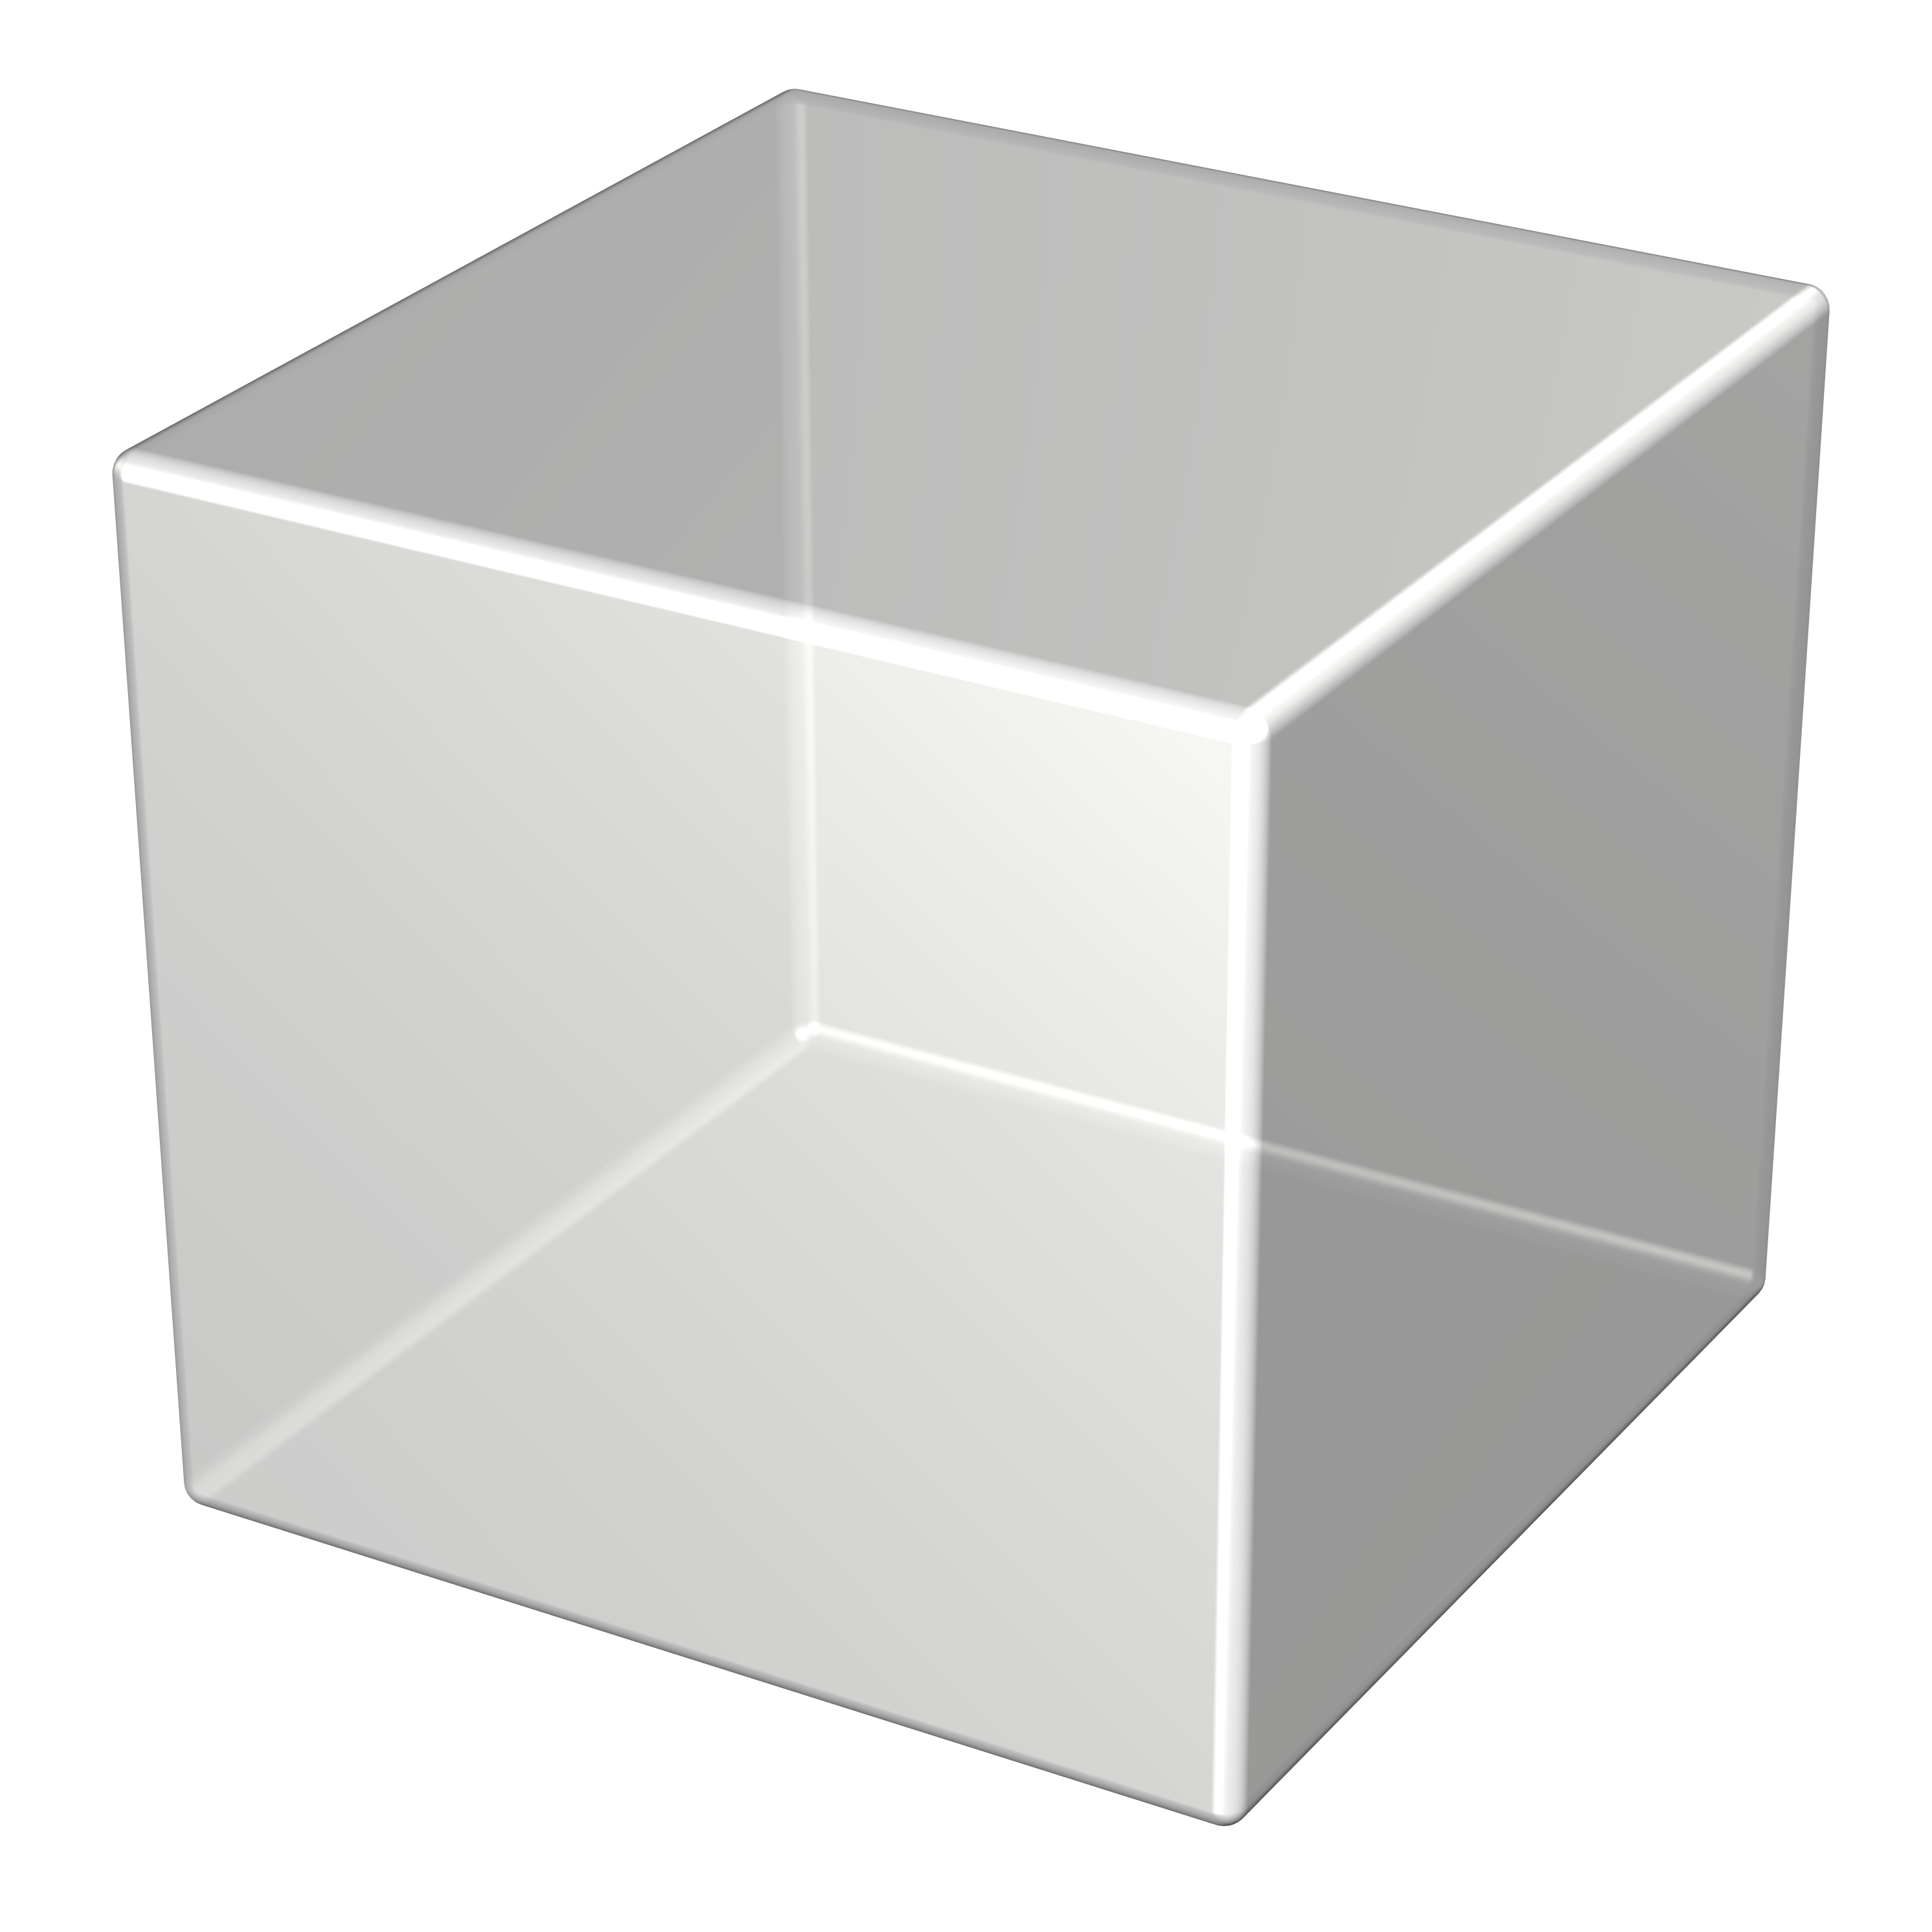 16 3d Square Iconpng Images 3d Cube Vector Data Cube Icon And 3d